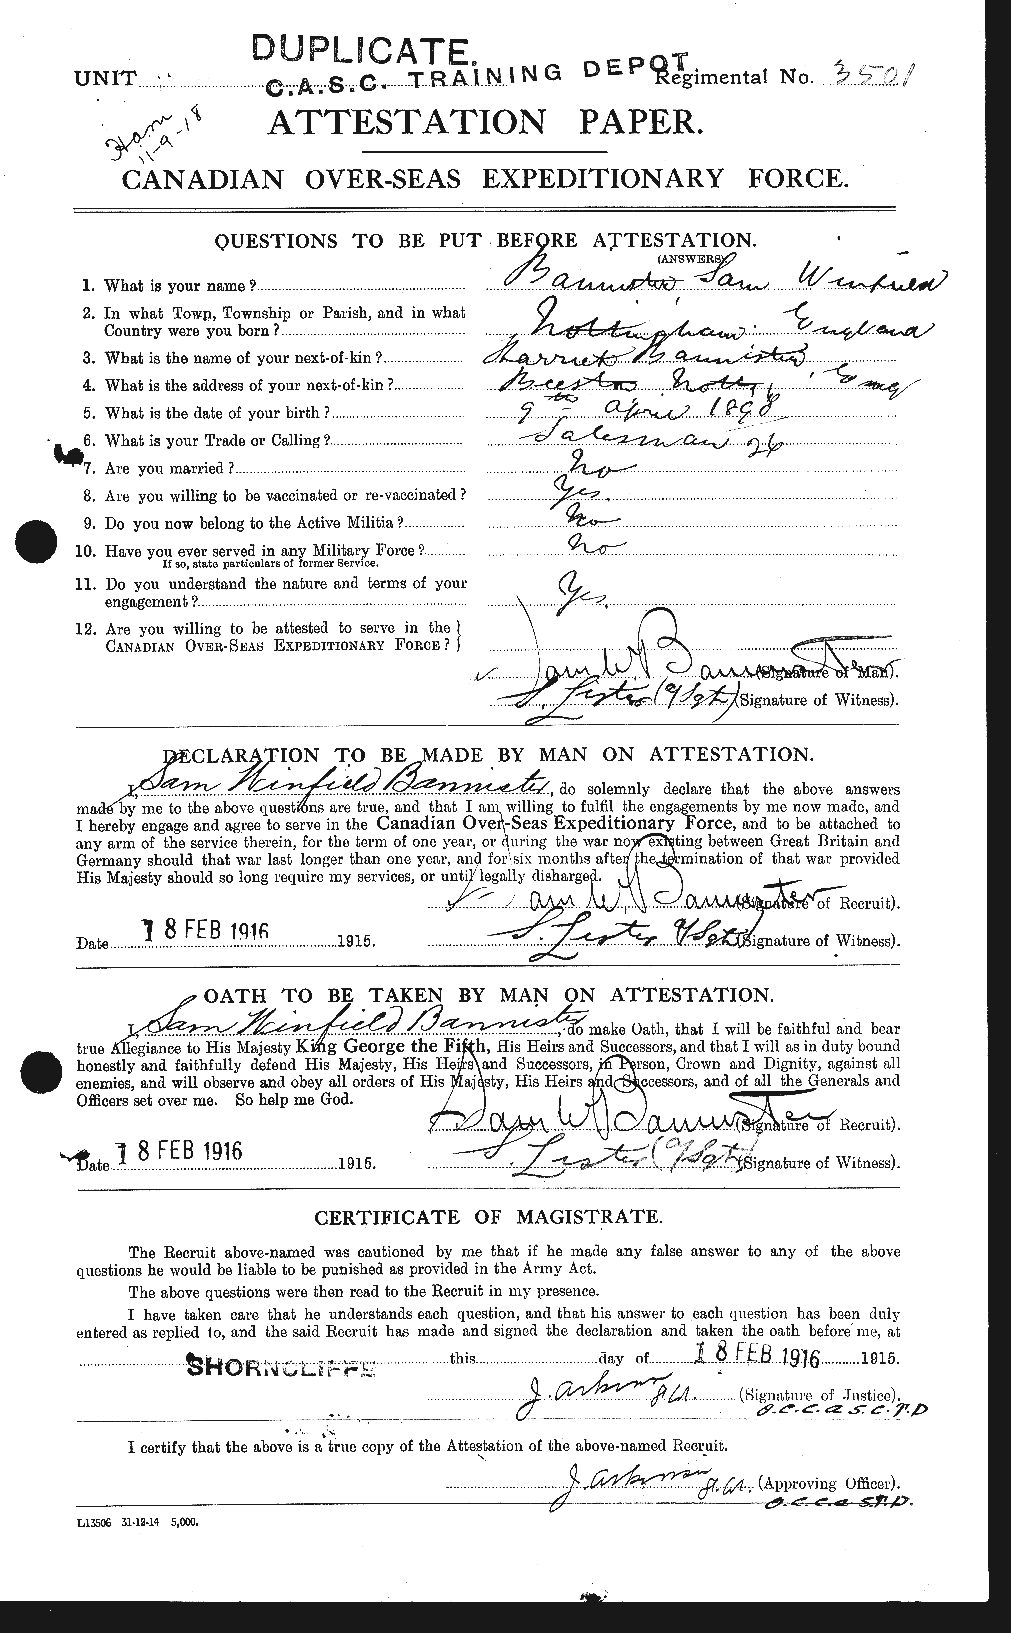 Personnel Records of the First World War - CEF 224764a